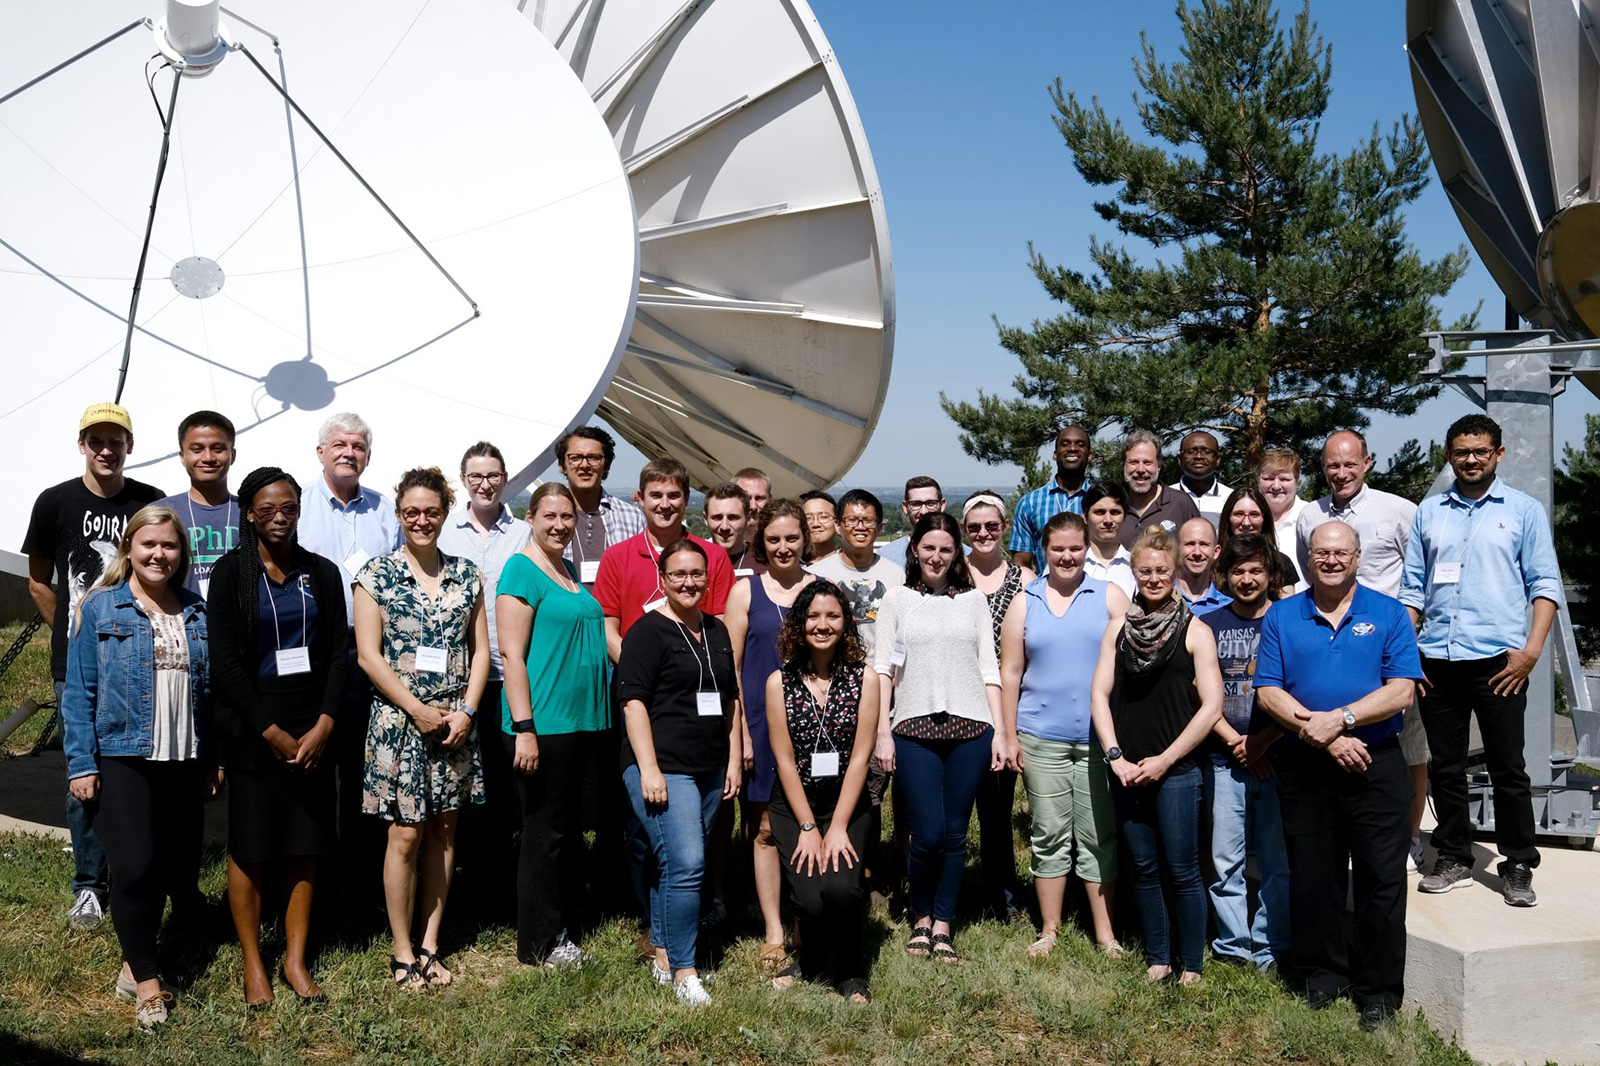 A group of about 20 people stands in front of an antenna at the CIRA NOAA/NASA Satellite Meteorology Summer Workshop.